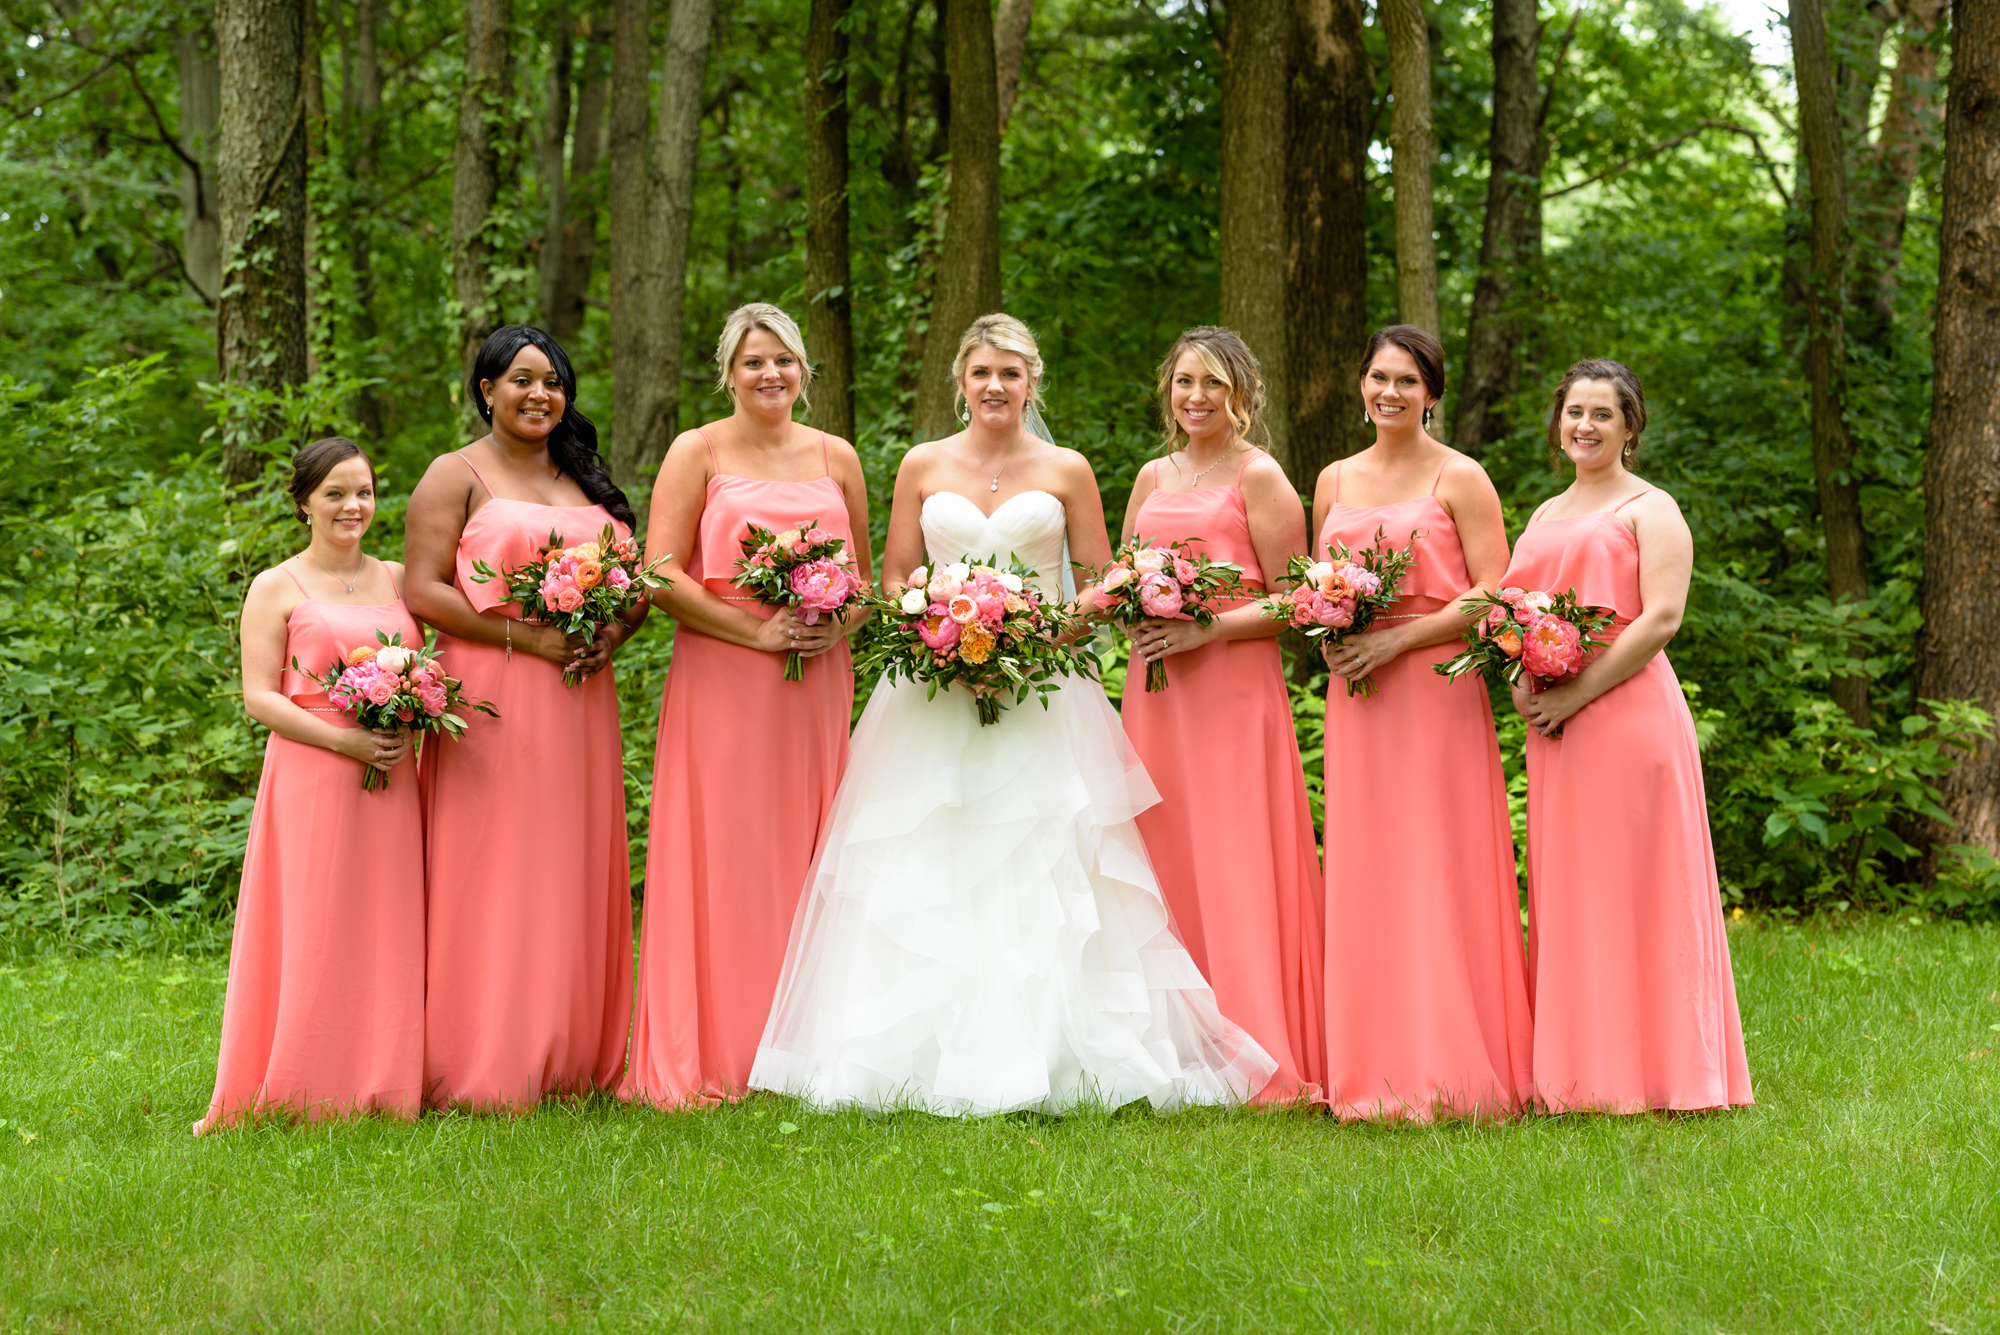 Bridesmaids before a wedding at Christ the King Lutheran Church